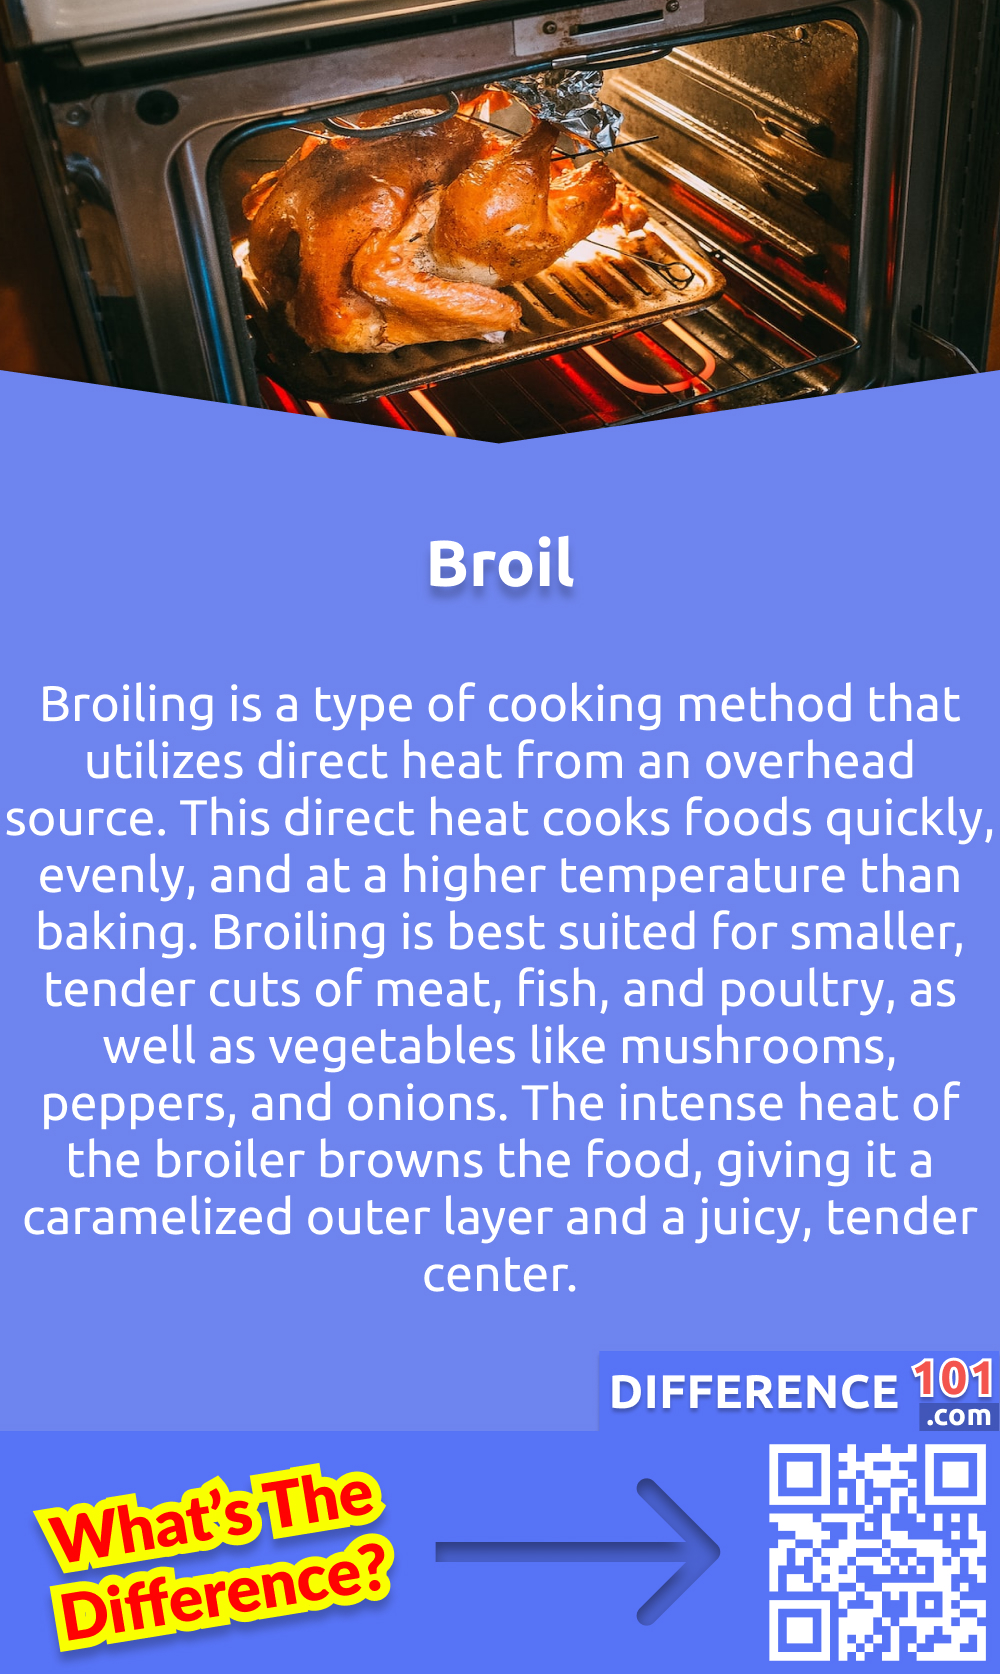 What Is Broil? Broiling is a type of cooking method that utilizes direct heat from an overhead source. This direct heat cooks foods quickly, evenly, and at a higher temperature than baking. Broiling is best suited for smaller, tender cuts of meat, fish, and poultry, as well as vegetables like mushrooms, peppers, and onions. The intense heat of the broiler browns the food, giving it a caramelized outer layer and a juicy, tender center. To achieve the best results, it is important to watch the food closely, as the high temperatures of the broiler can also cause it to overcook quickly. Proper preparation is also important; foods should be seasoned and lightly oiled to ensure they do not dry out during the broiling process.